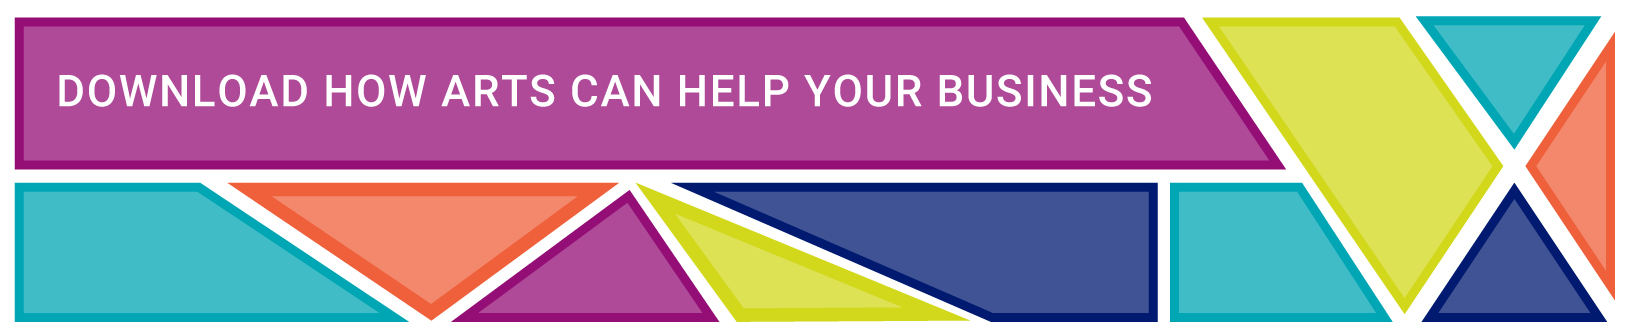 Help Your Business